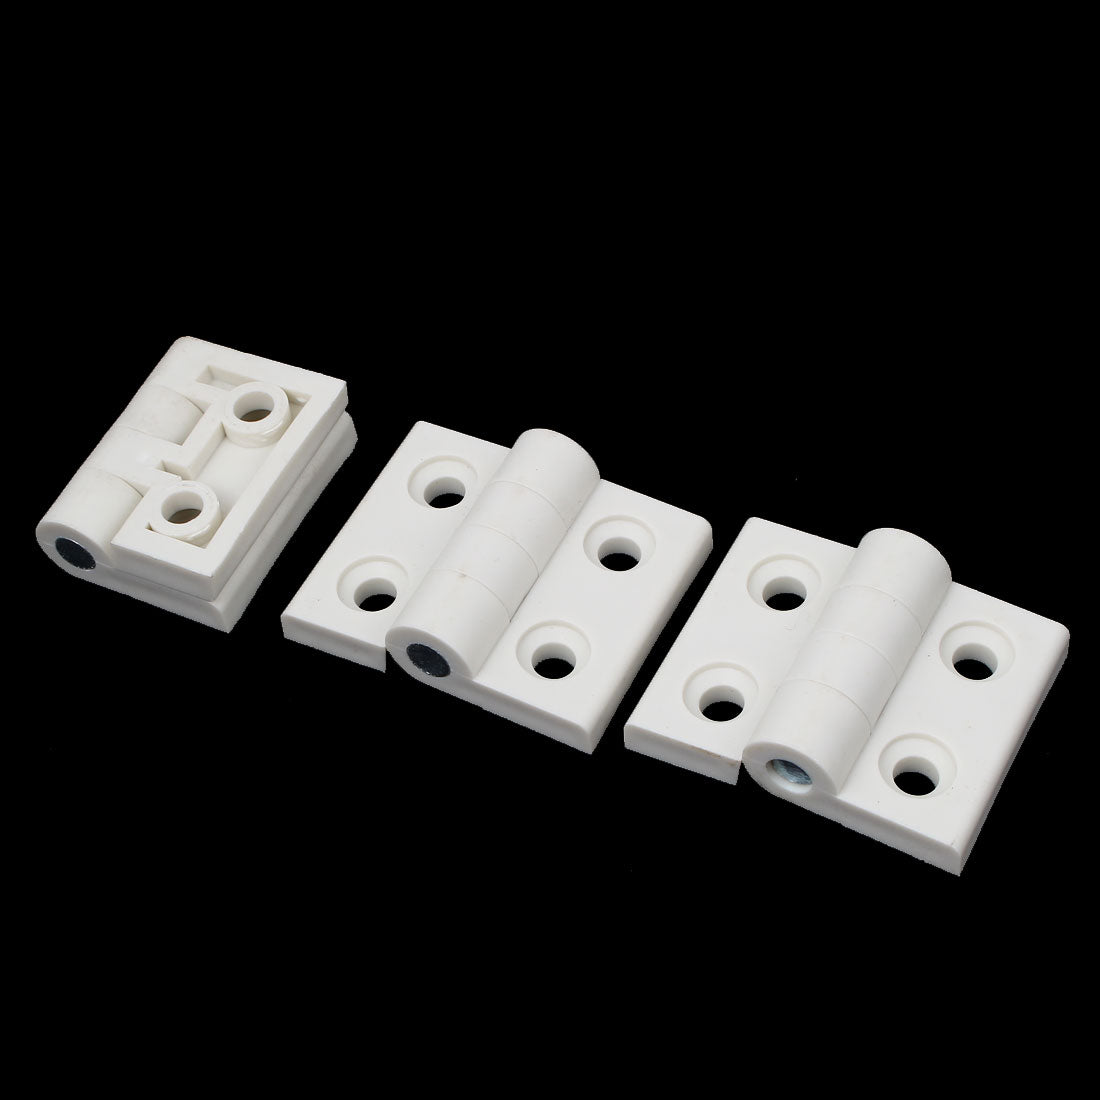 uxcell Uxcell Plastic Door Cabinet Hardware Bearing Hinge White 57mm x 45mm 3pcs